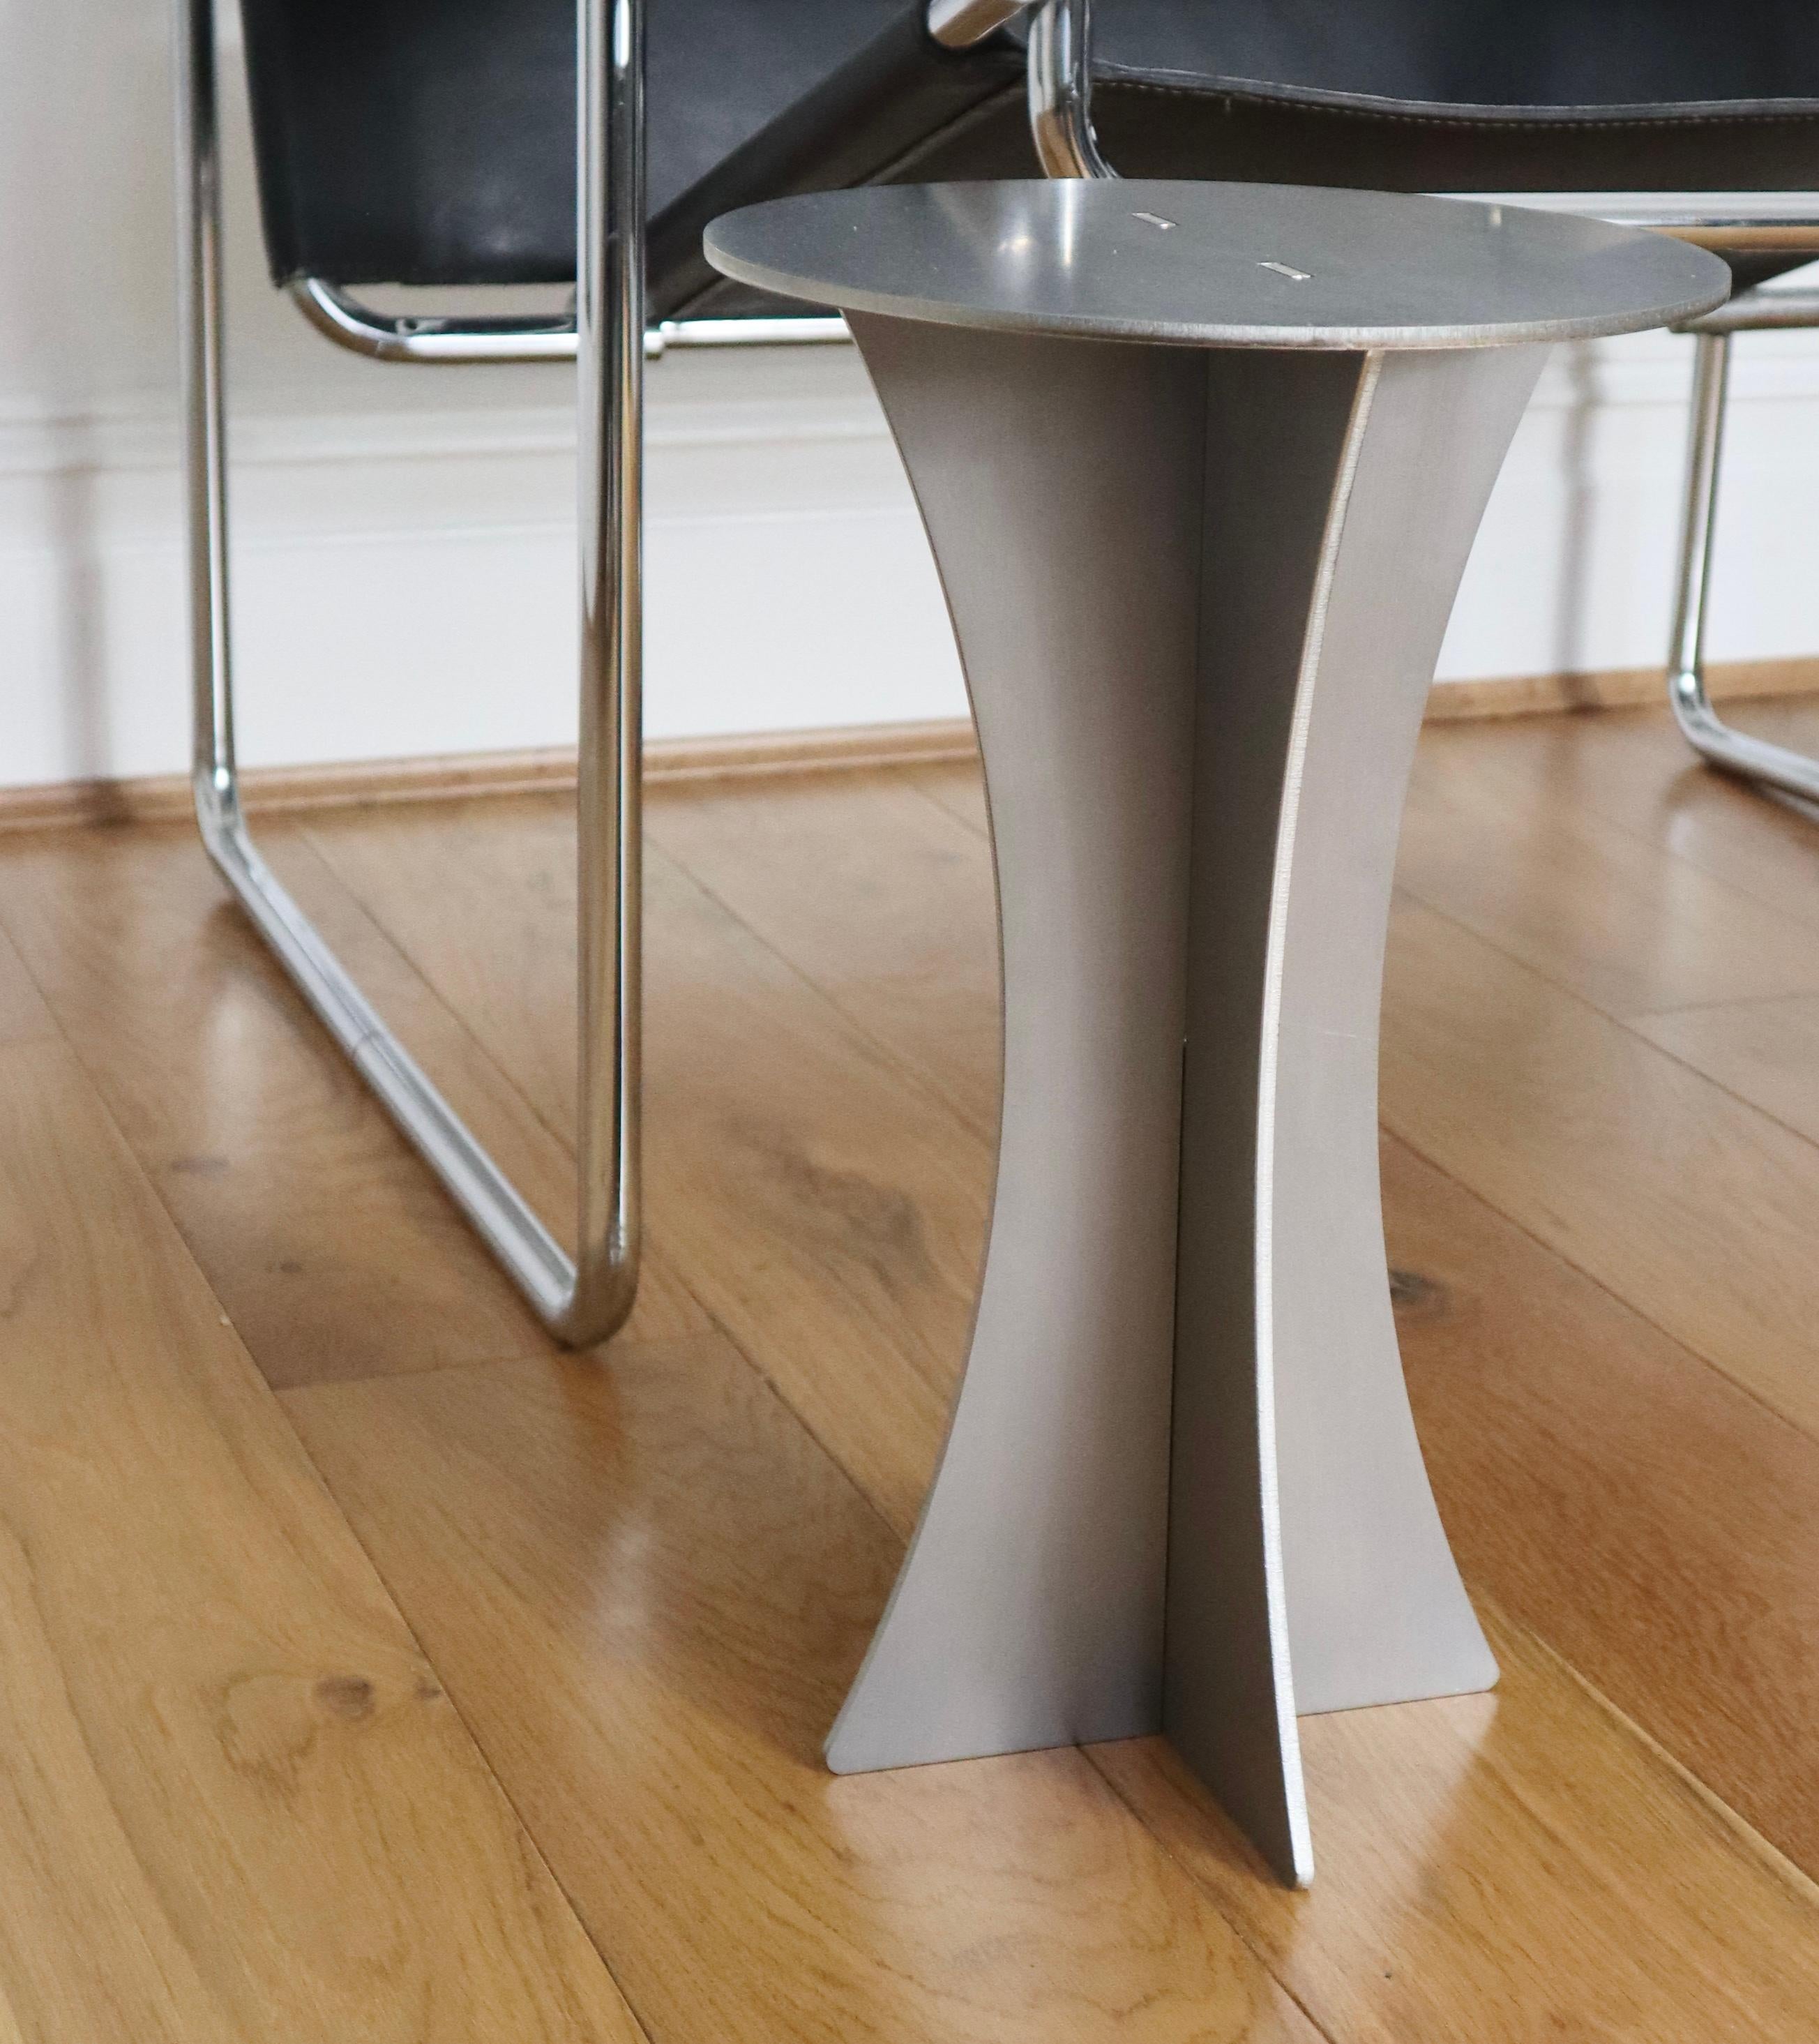 British T-01 Bushed Stainless Steel Silver Metal Side Table Bauhaus Style